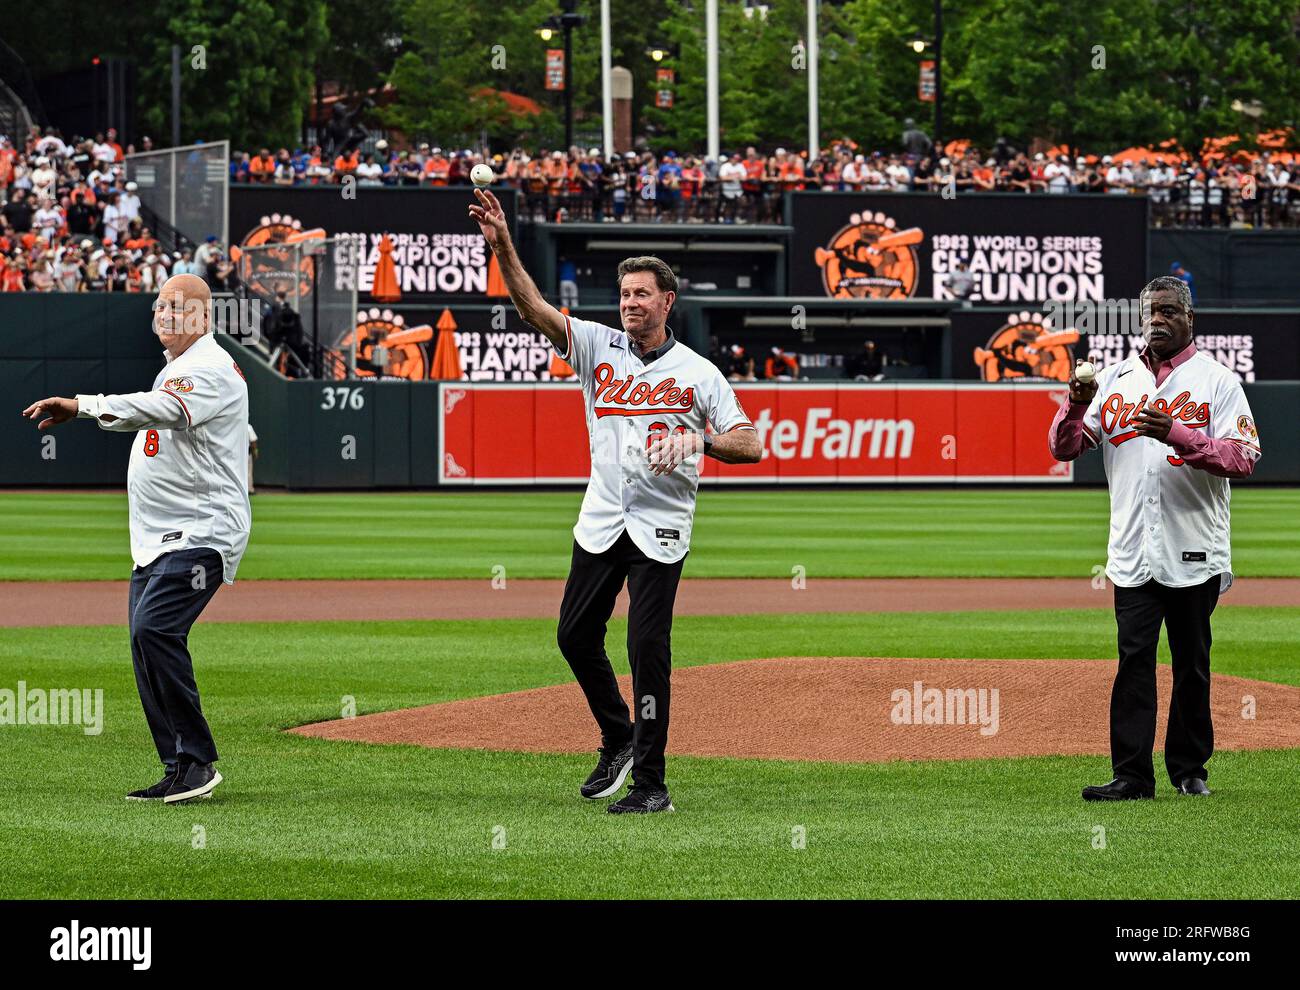 BALTIMORE, MD - August 5: Former Baltimore Orioles players (L-R), Cal  Ripken Jr, Jim Palmer and Eddie Murray throw out the ceremonial first pitch  prior to the New York Mets versus the